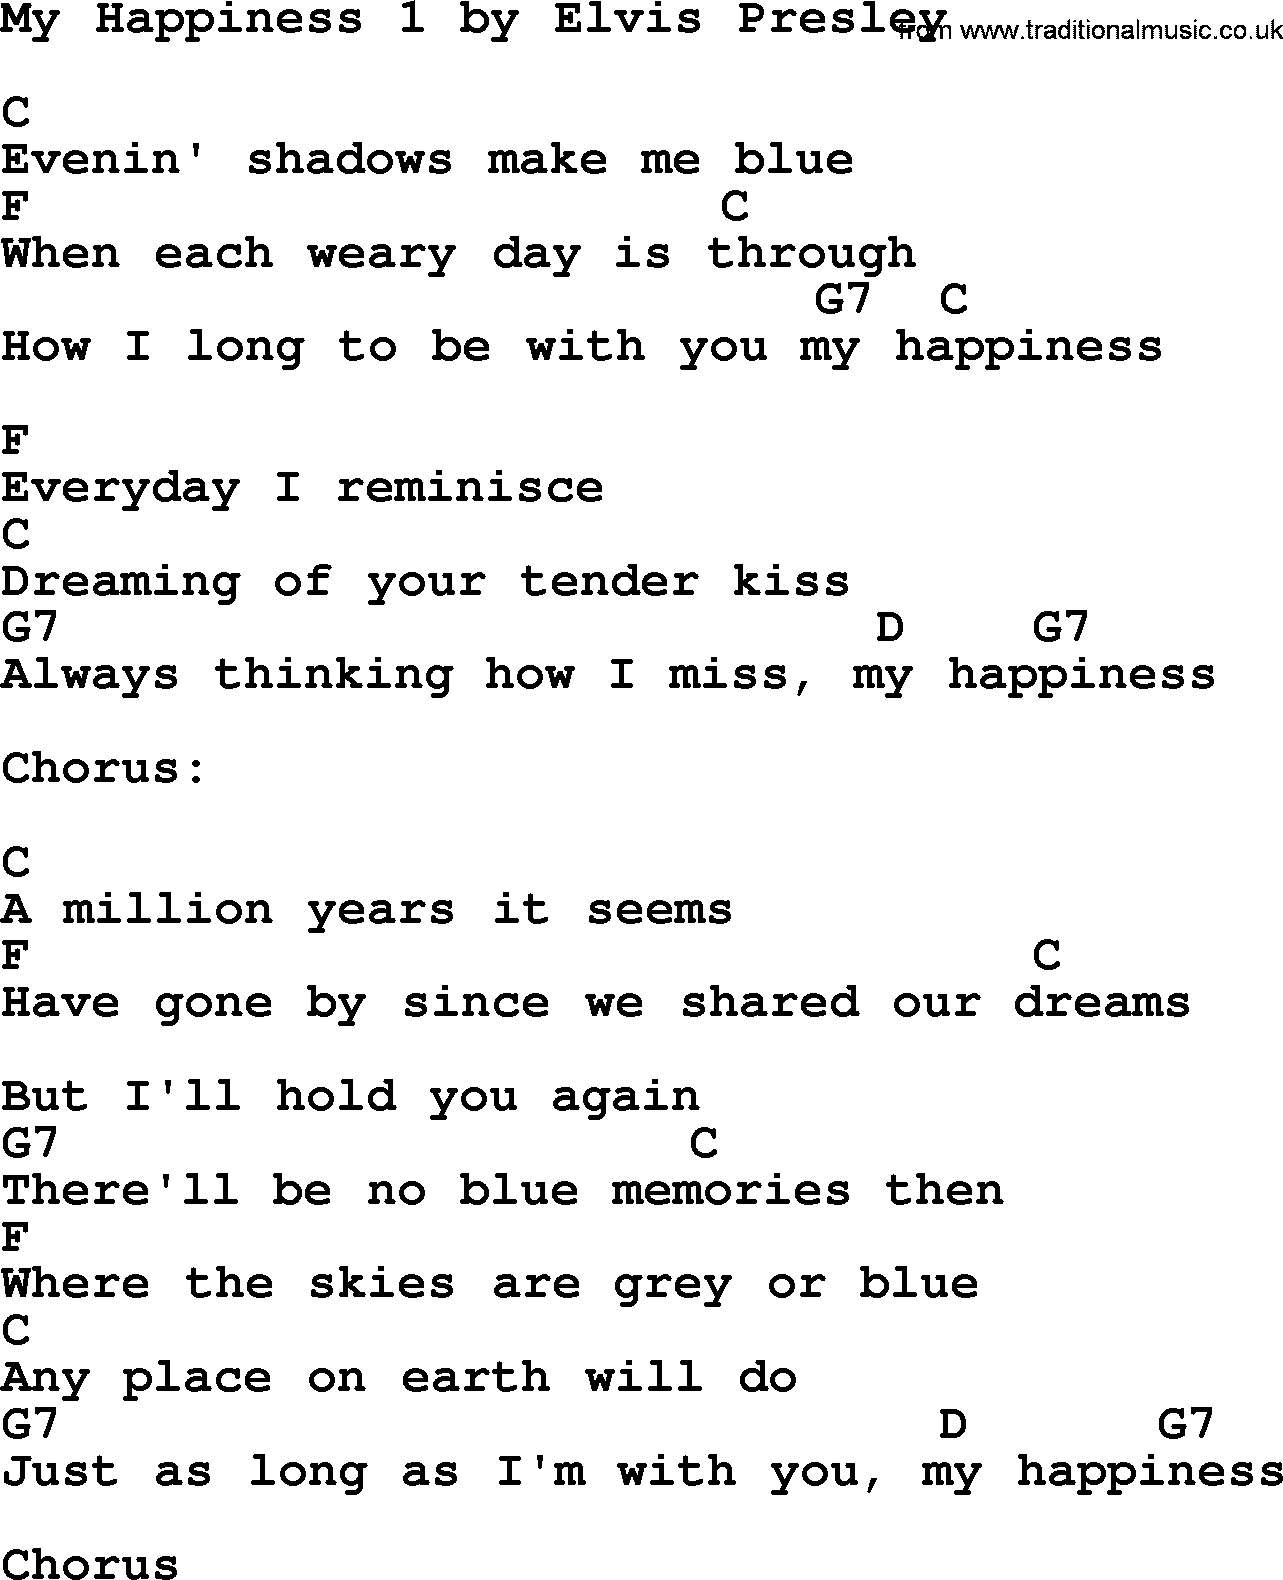 Elvis Presley song: My Happiness 1, lyrics and chords